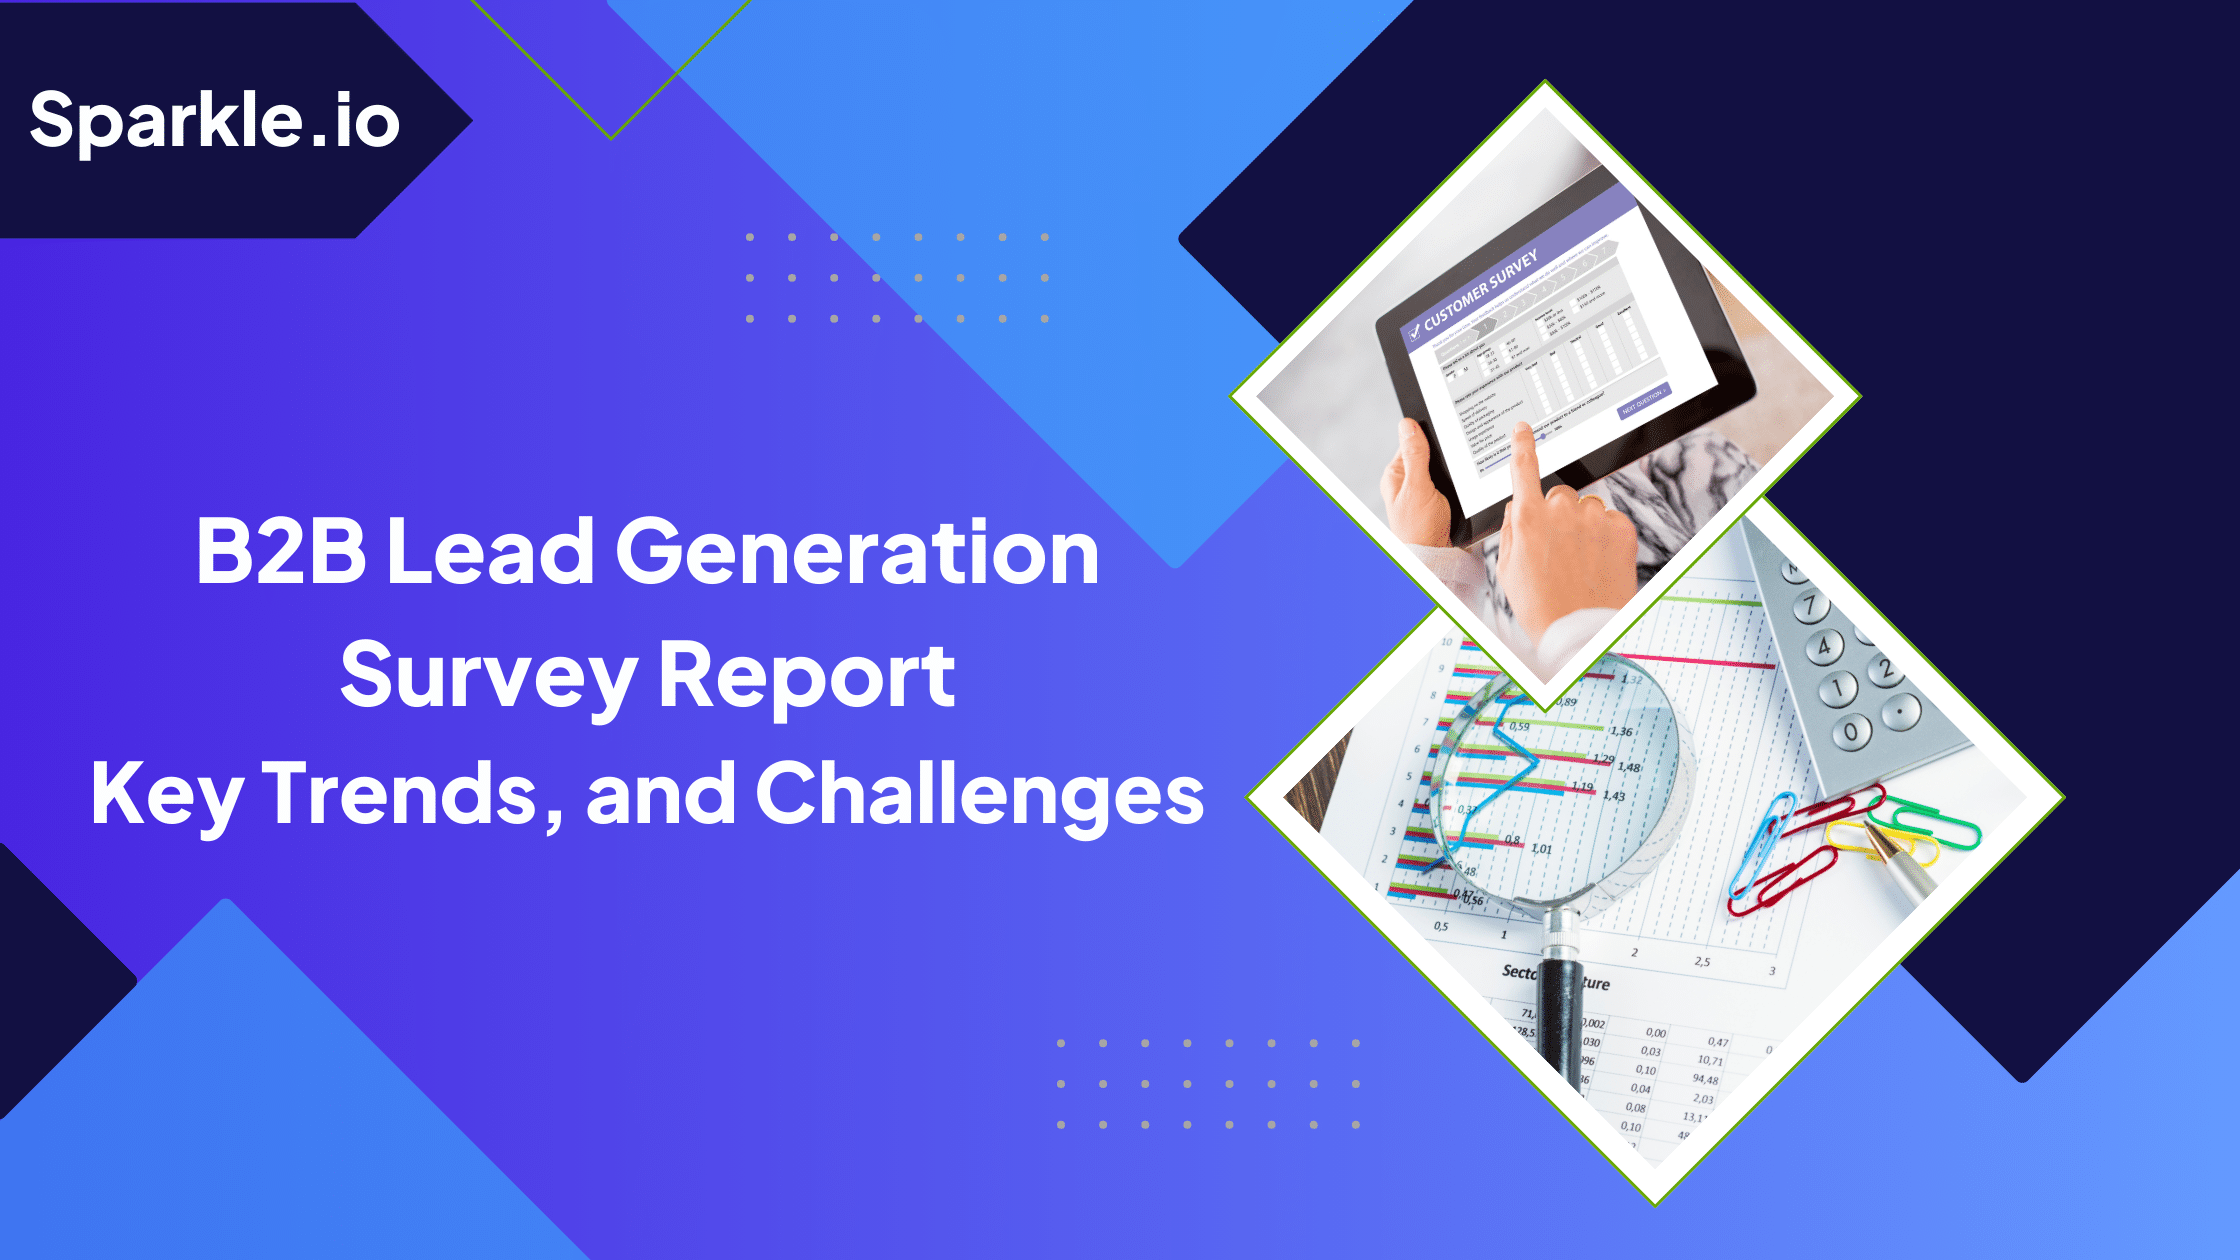 B2B Lead Generation Survey Report – Key Trends, and Challenges